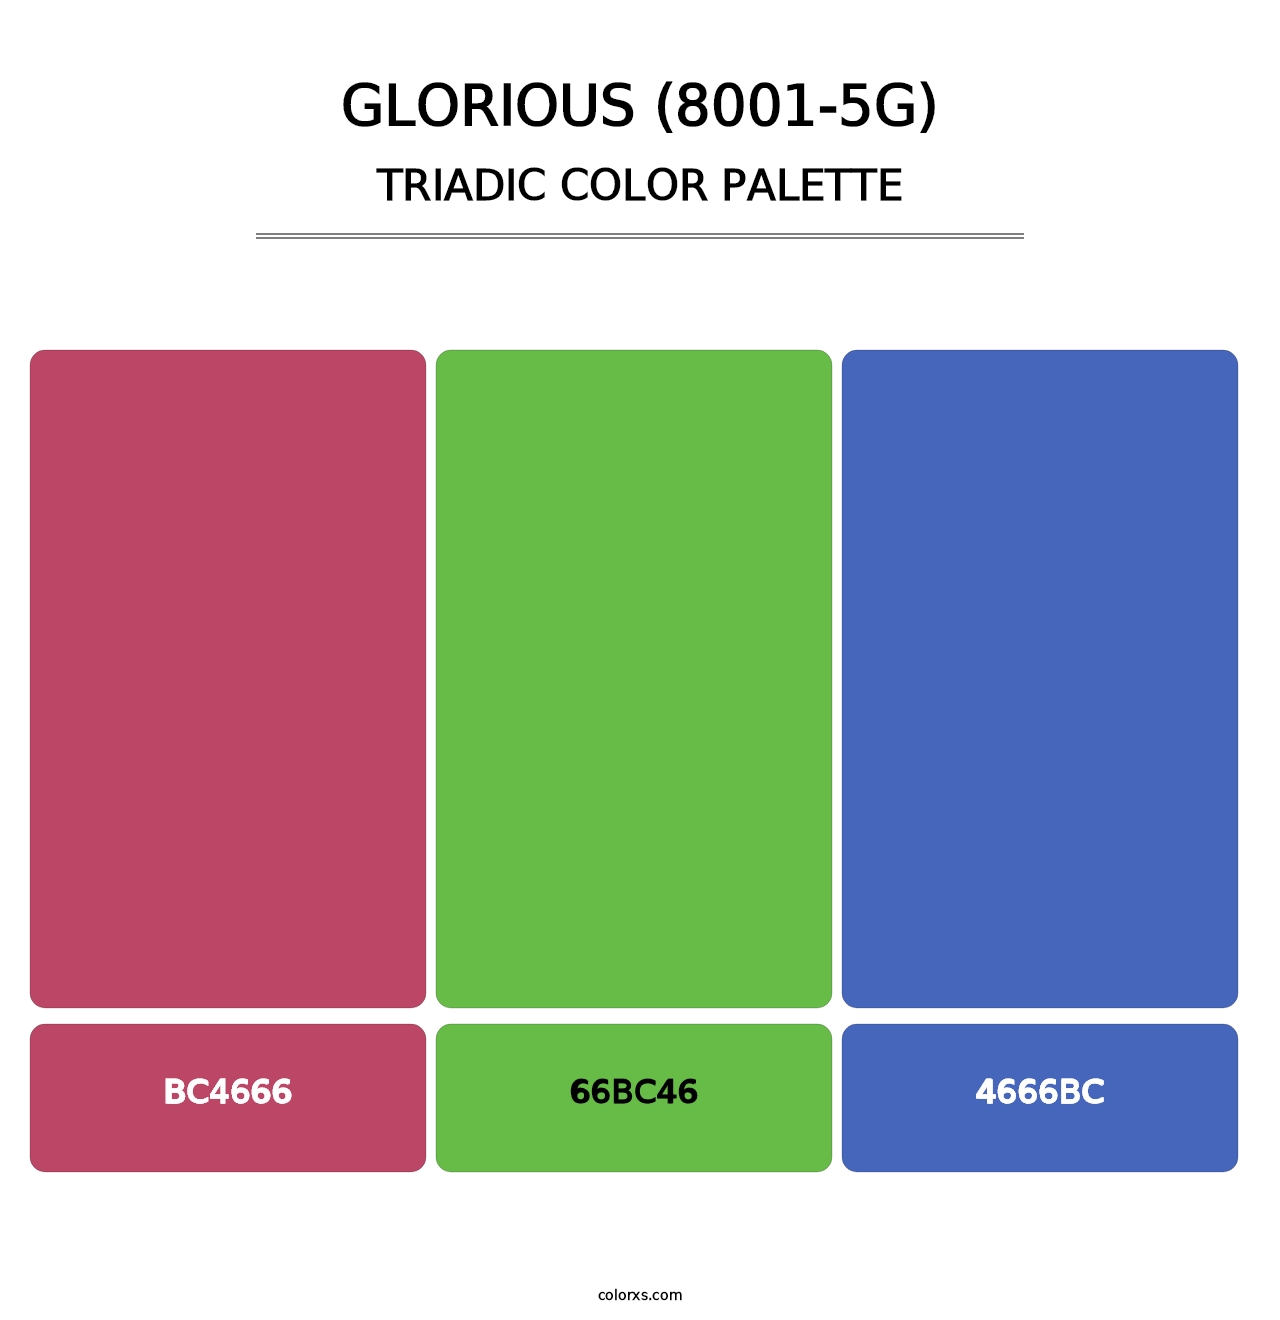 Glorious (8001-5G) - Triadic Color Palette